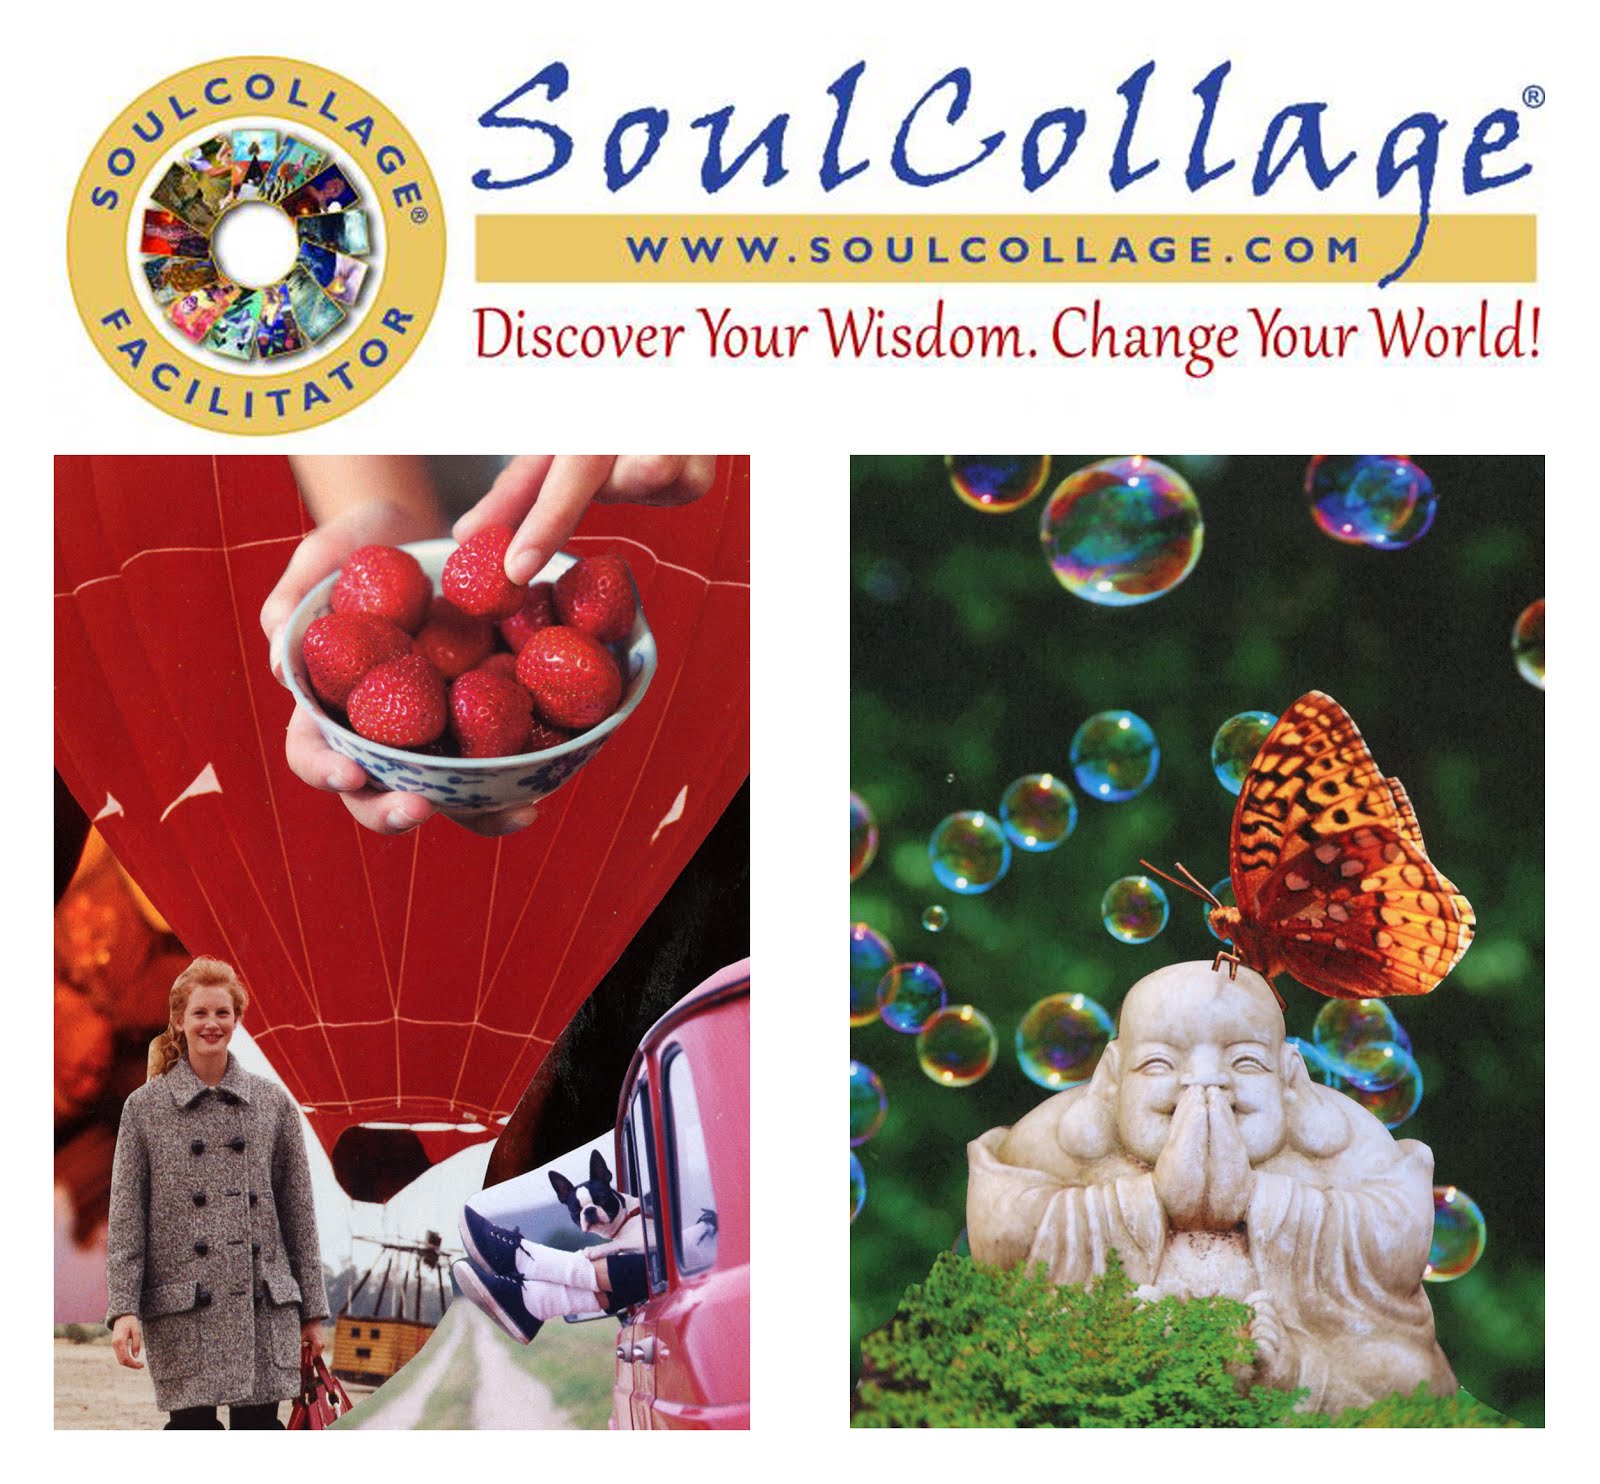 SoulCollage® as a Creative Self-Care Practice